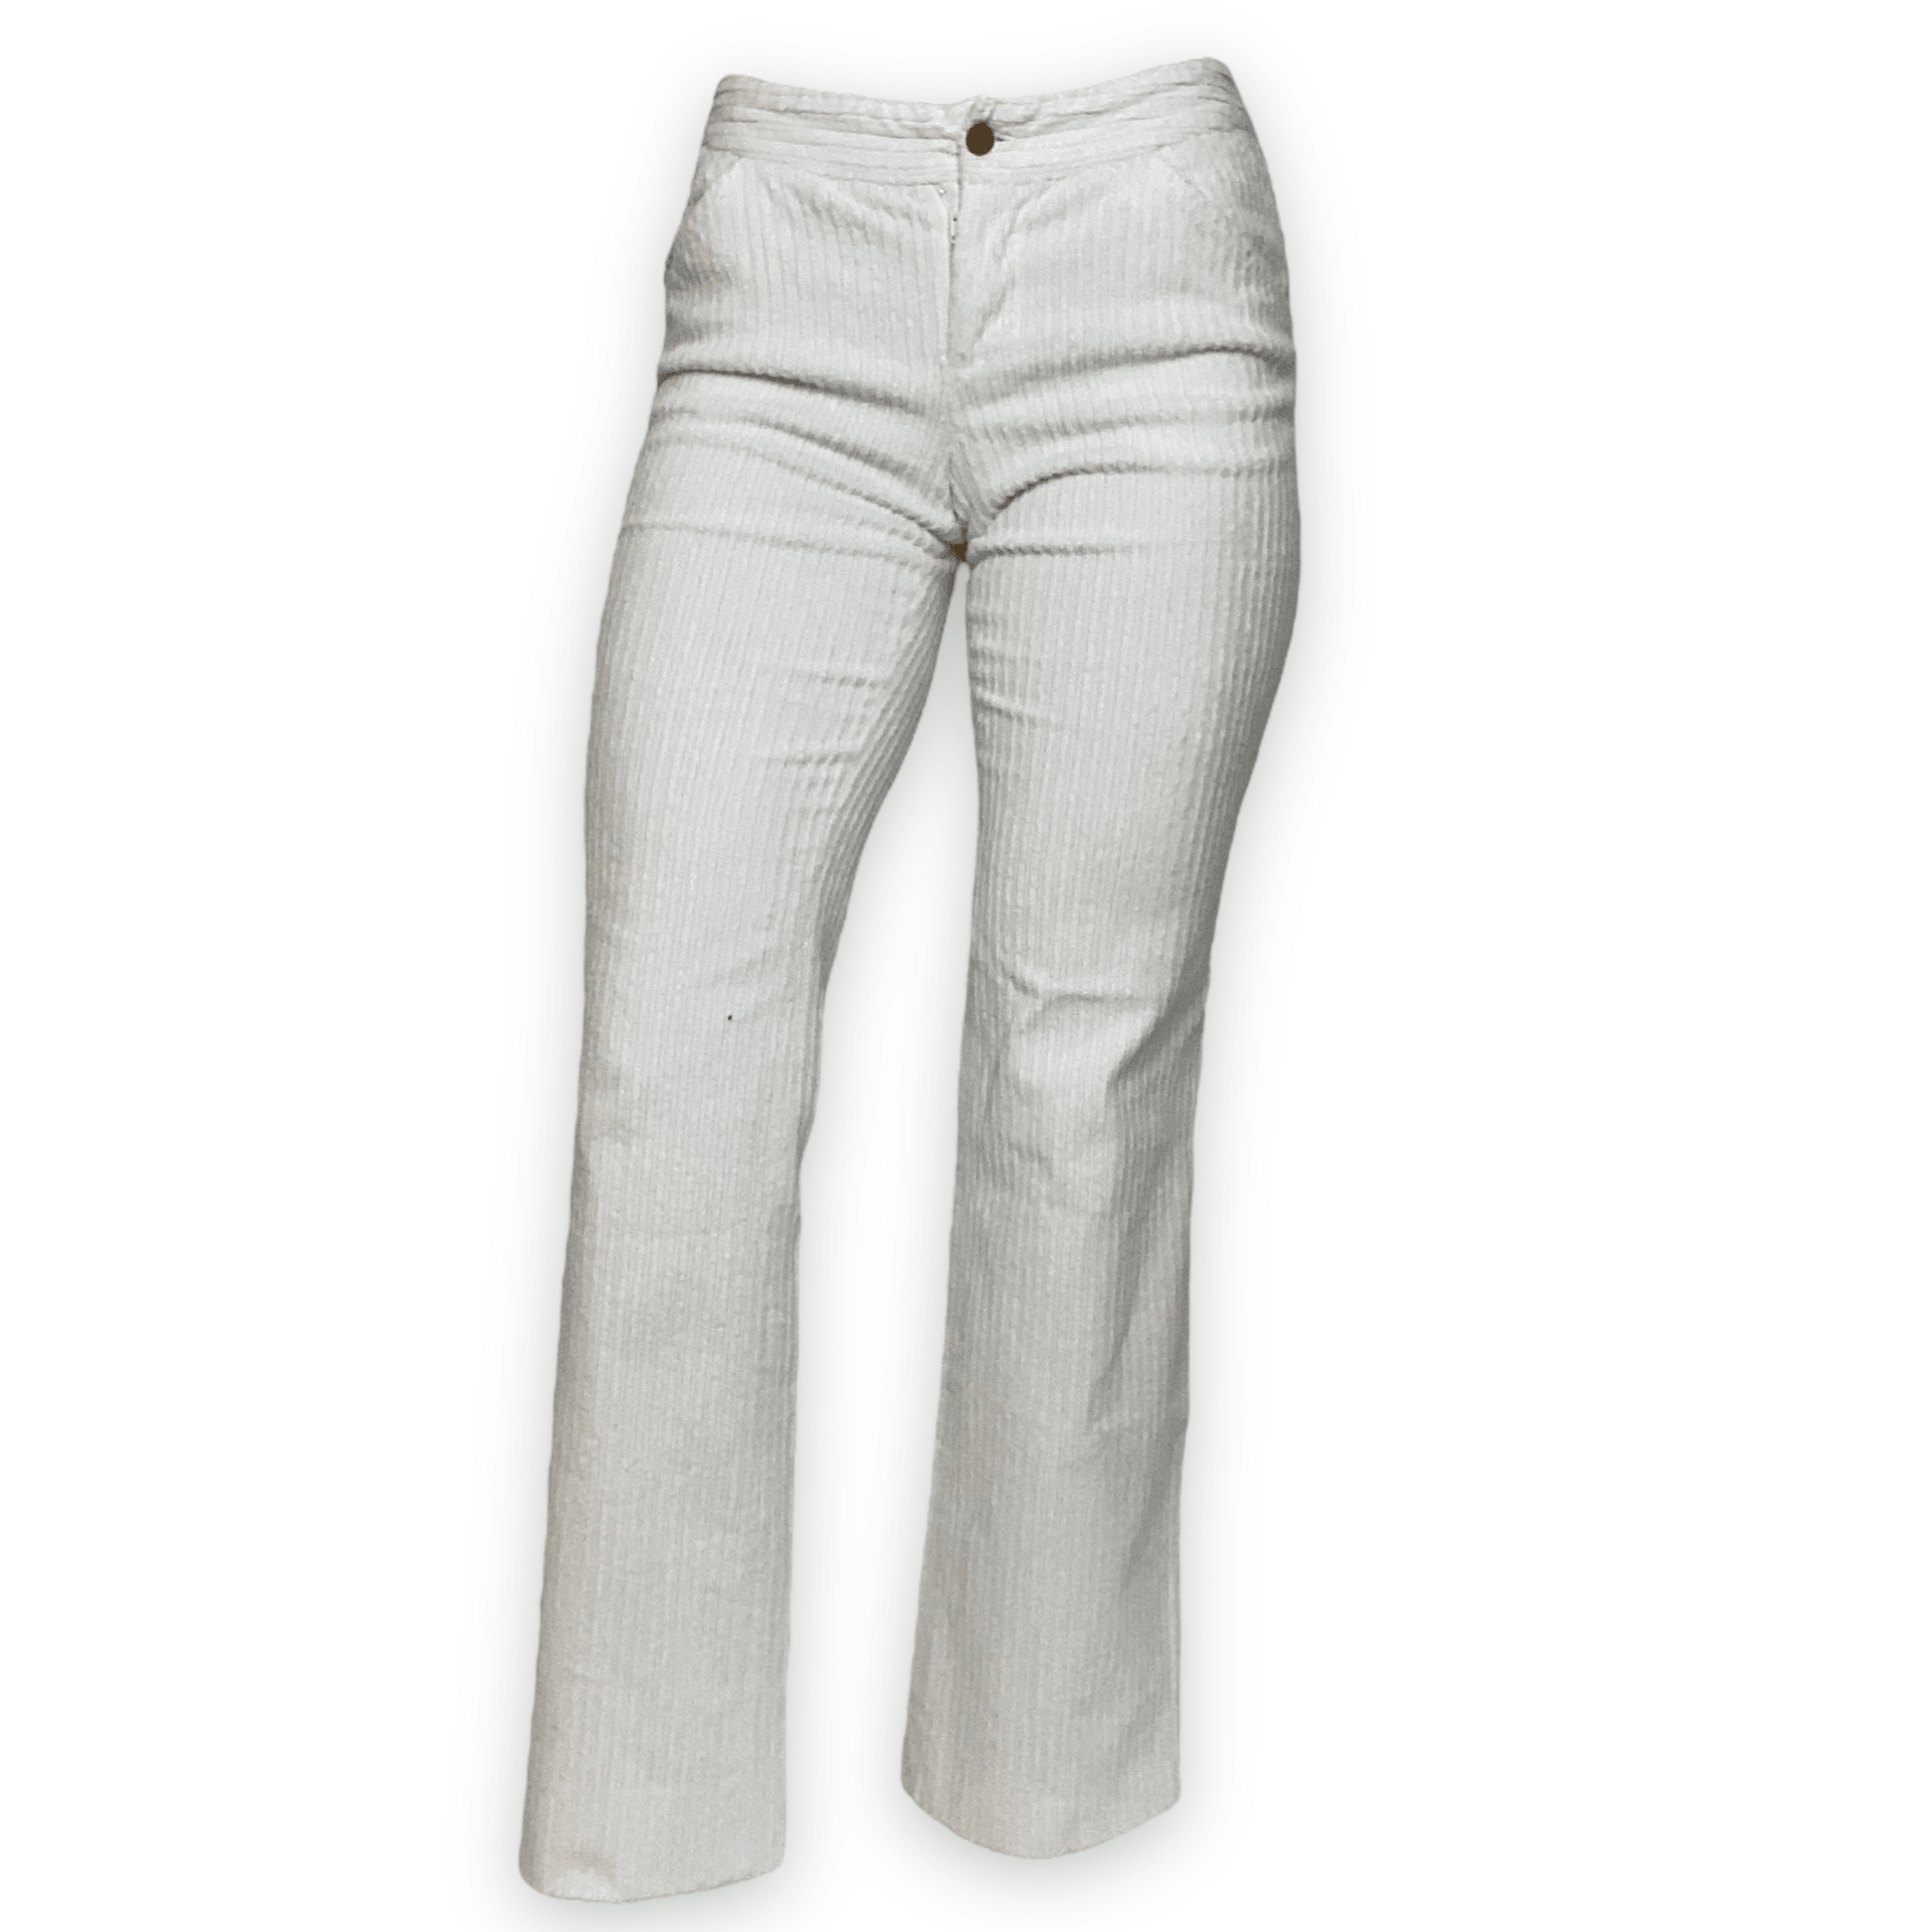 The Snug D&G White Corduroy One - Known Source